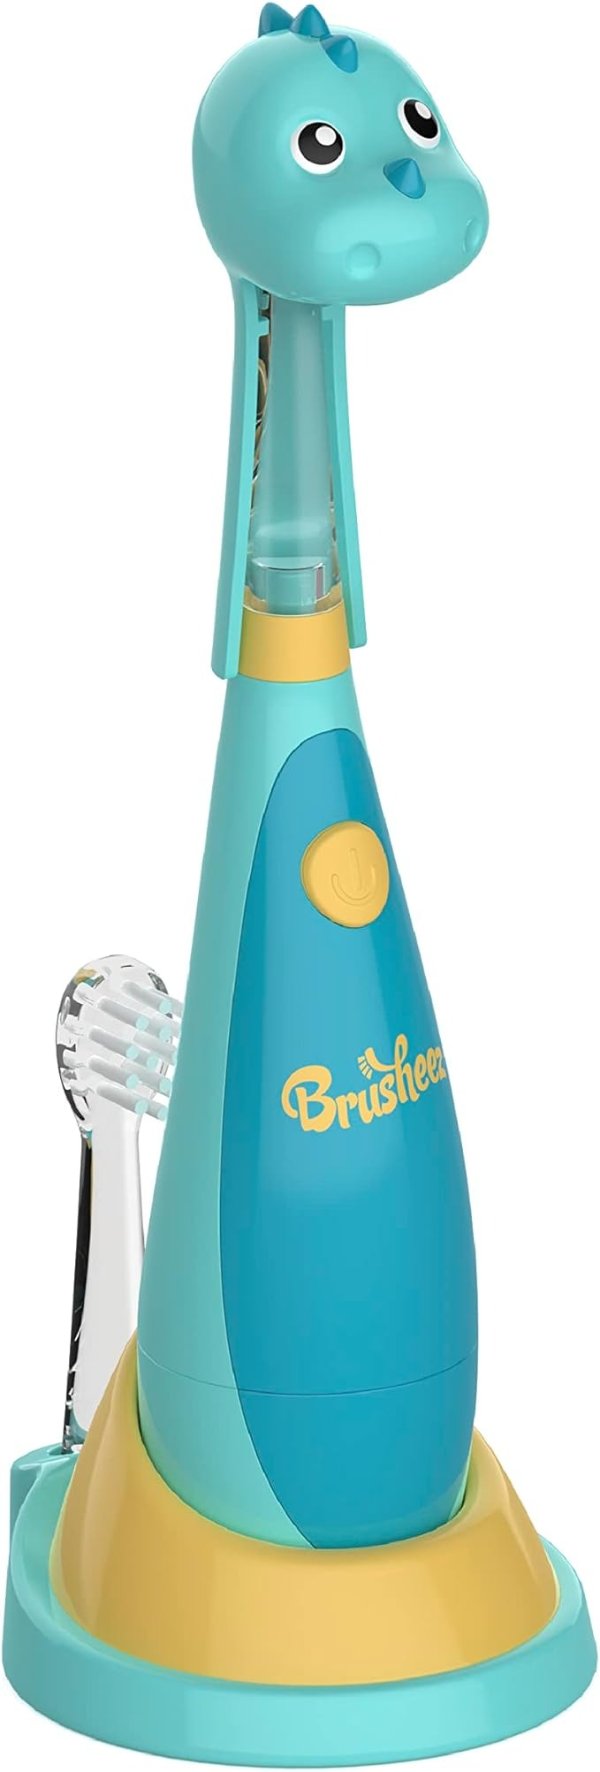 Little Toddlers Sonic Toothbrush - Safe & Gentle Toothbrush for Ages 1-3 with Built-in, Light-Up 2-Minute Timer, Extra Brush Head, & Storage Base for First-Time Brushers (Rex The Dinosaur)